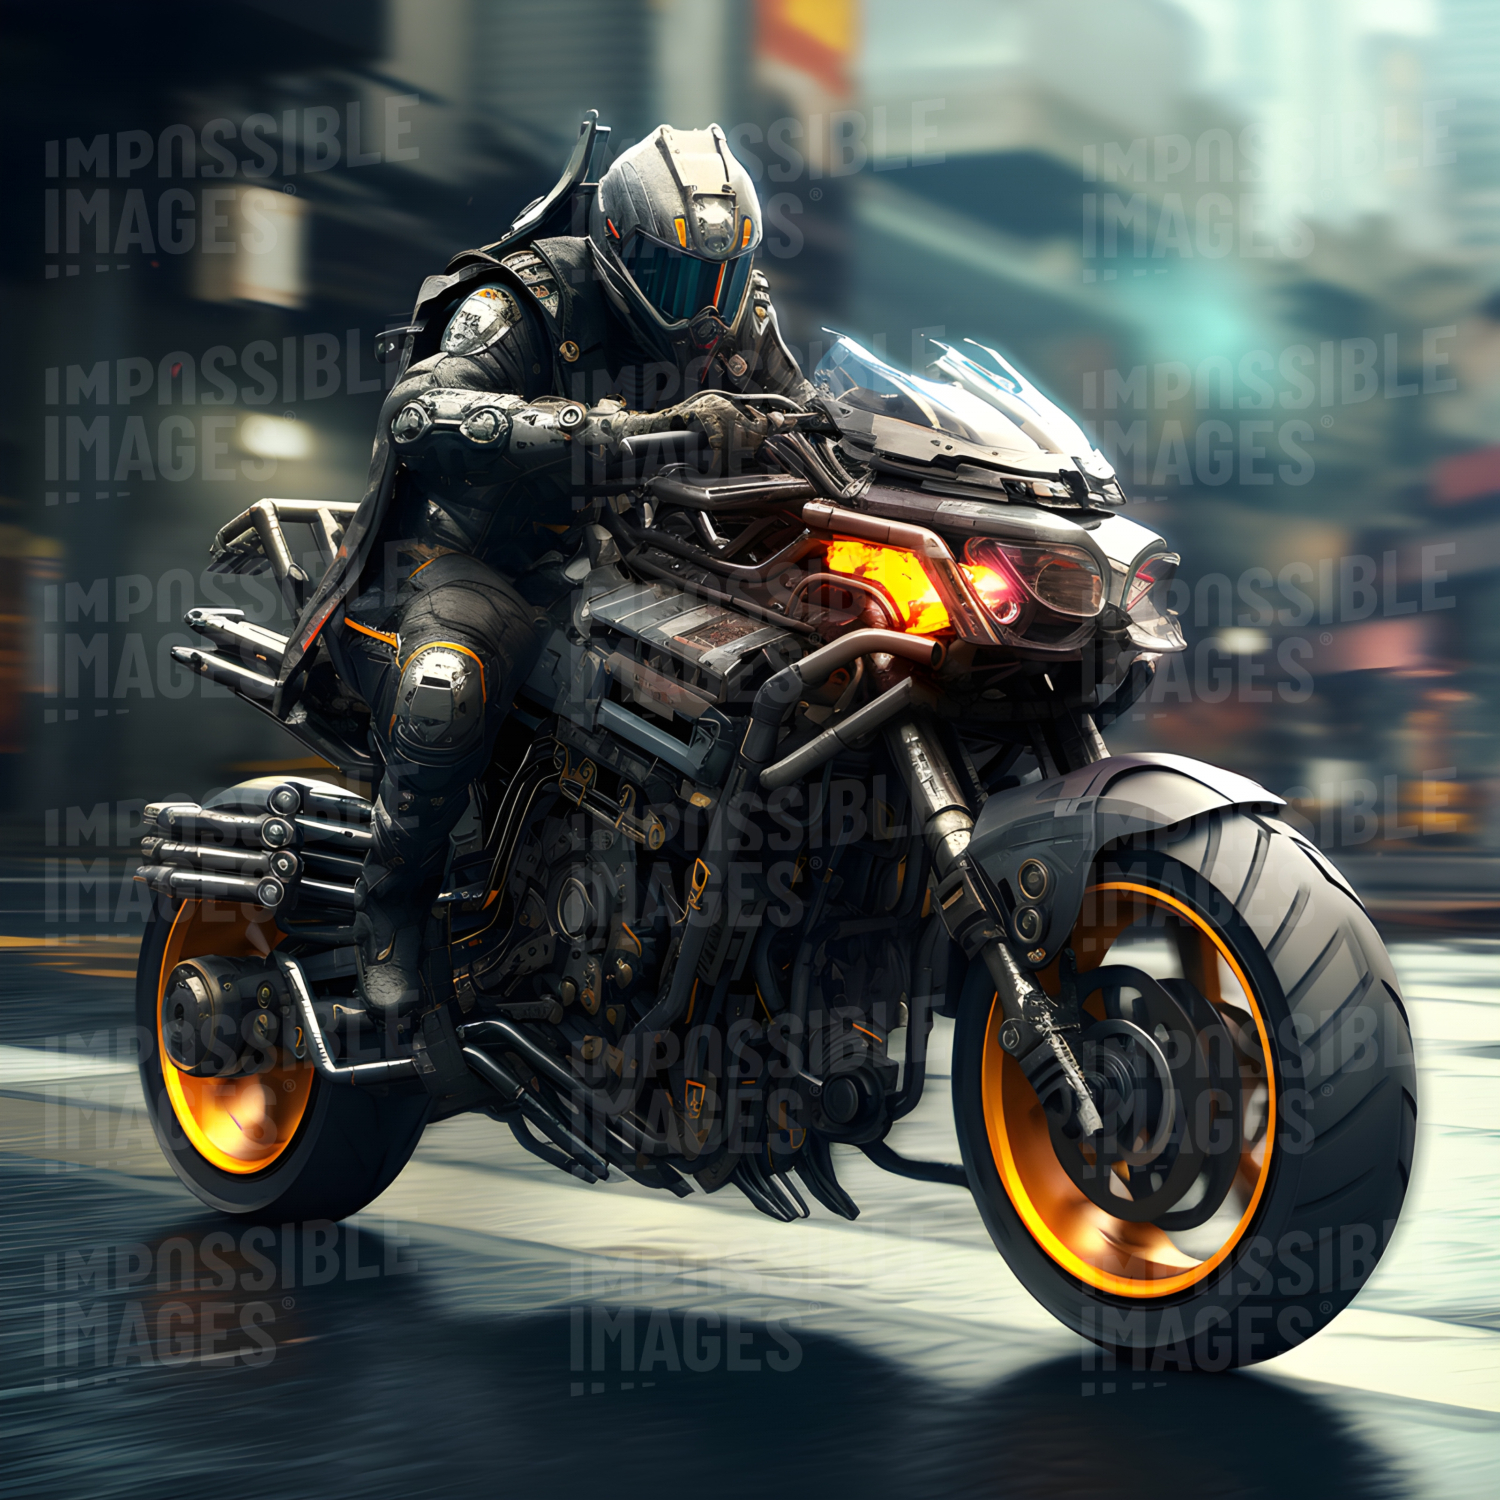 Futuristic motorcycle with an armoured rider -  A Futuristic Motorcycle with an Armored Rider, Ready to Take on Any Challenge that Comes Their Way.